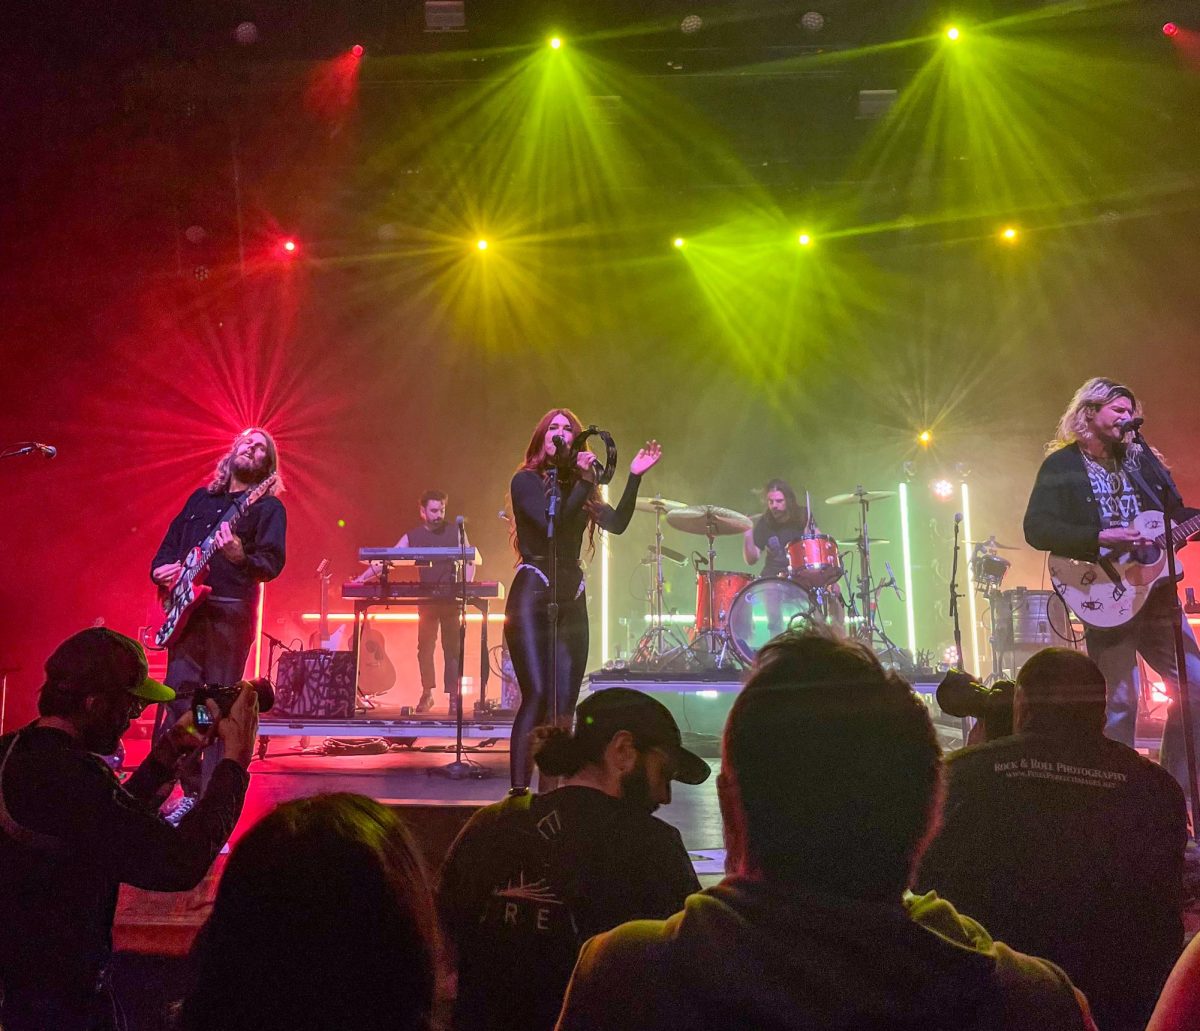 Grouplove performed at the Observatory North Park as part of their national tour on March 5